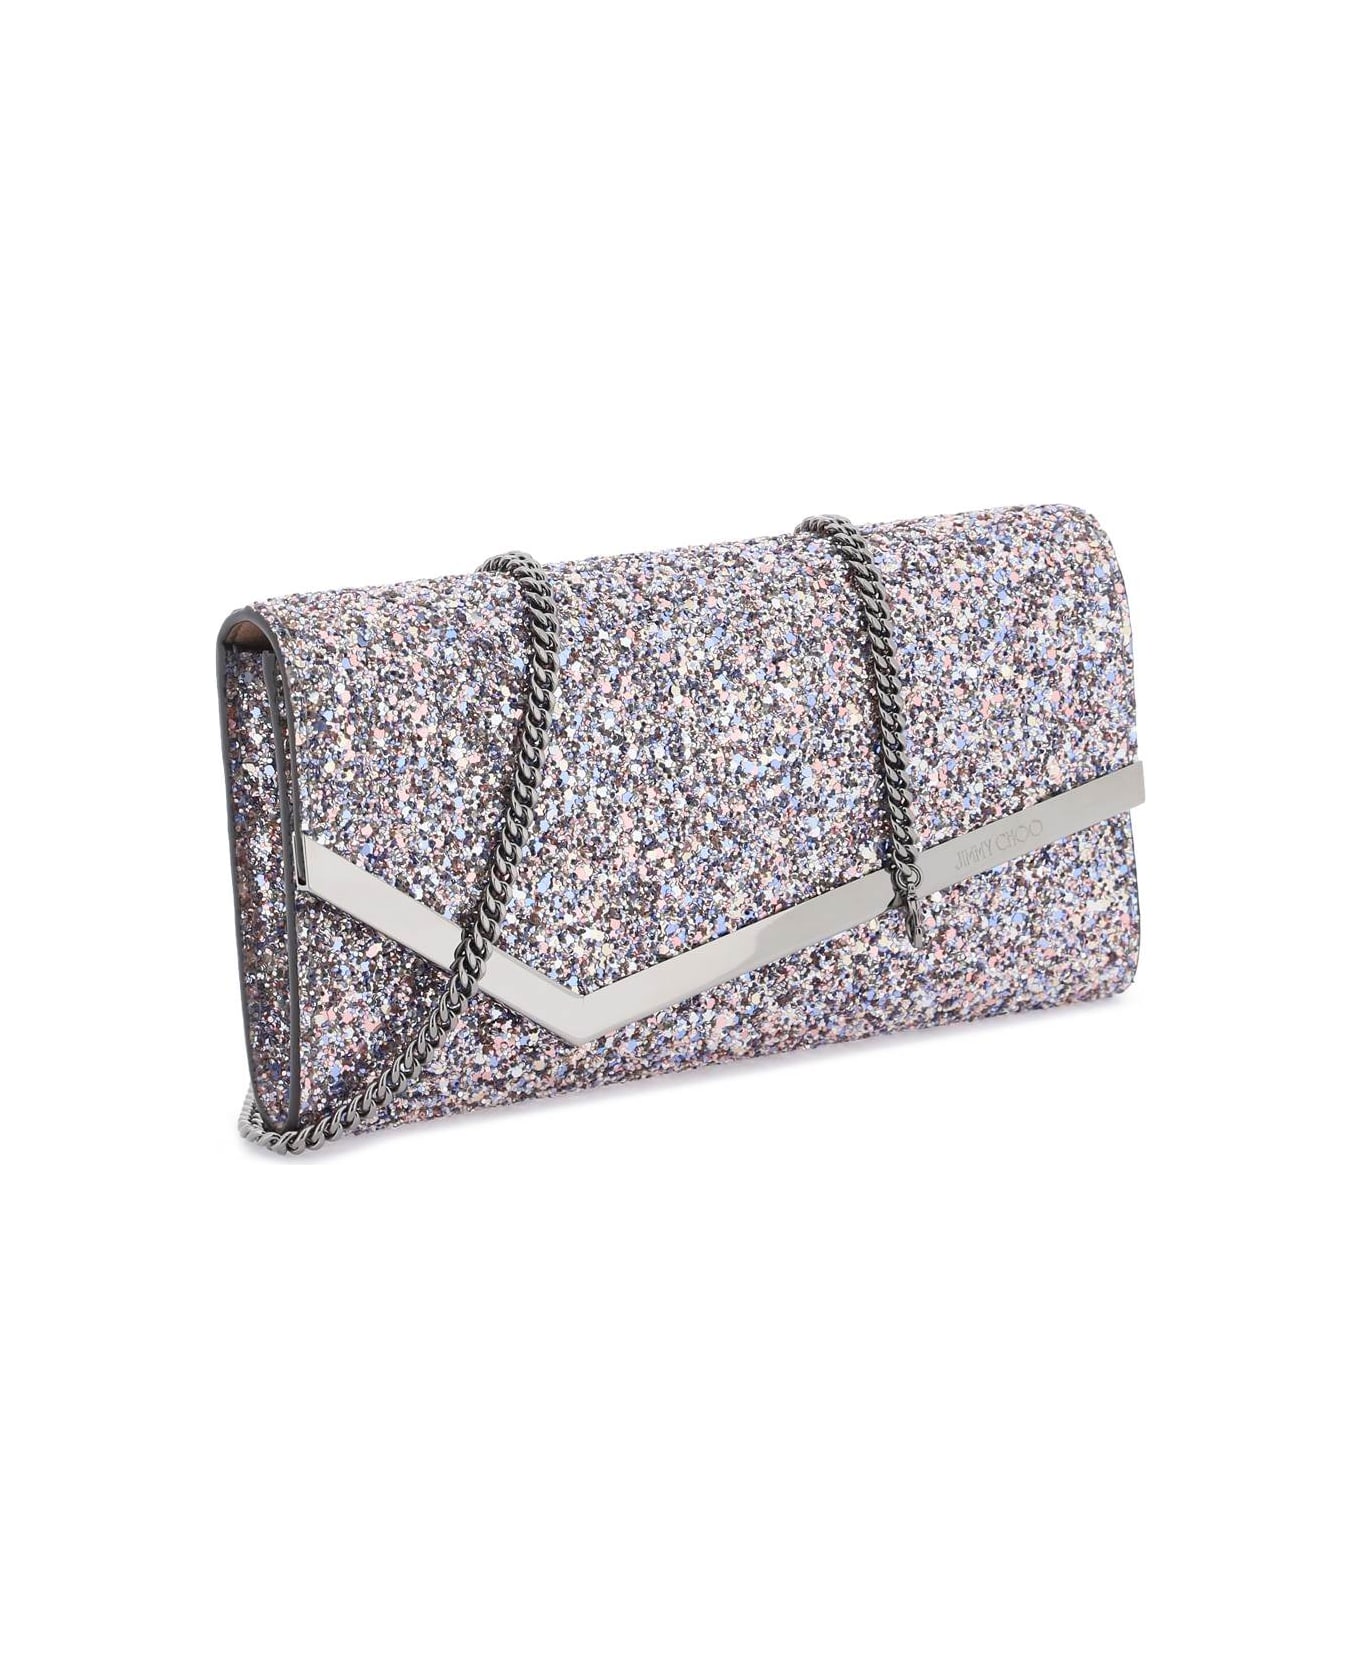 Jimmy Choo Glittered Emmie Clutch - SPRINKLE MIX クラッチバッグ